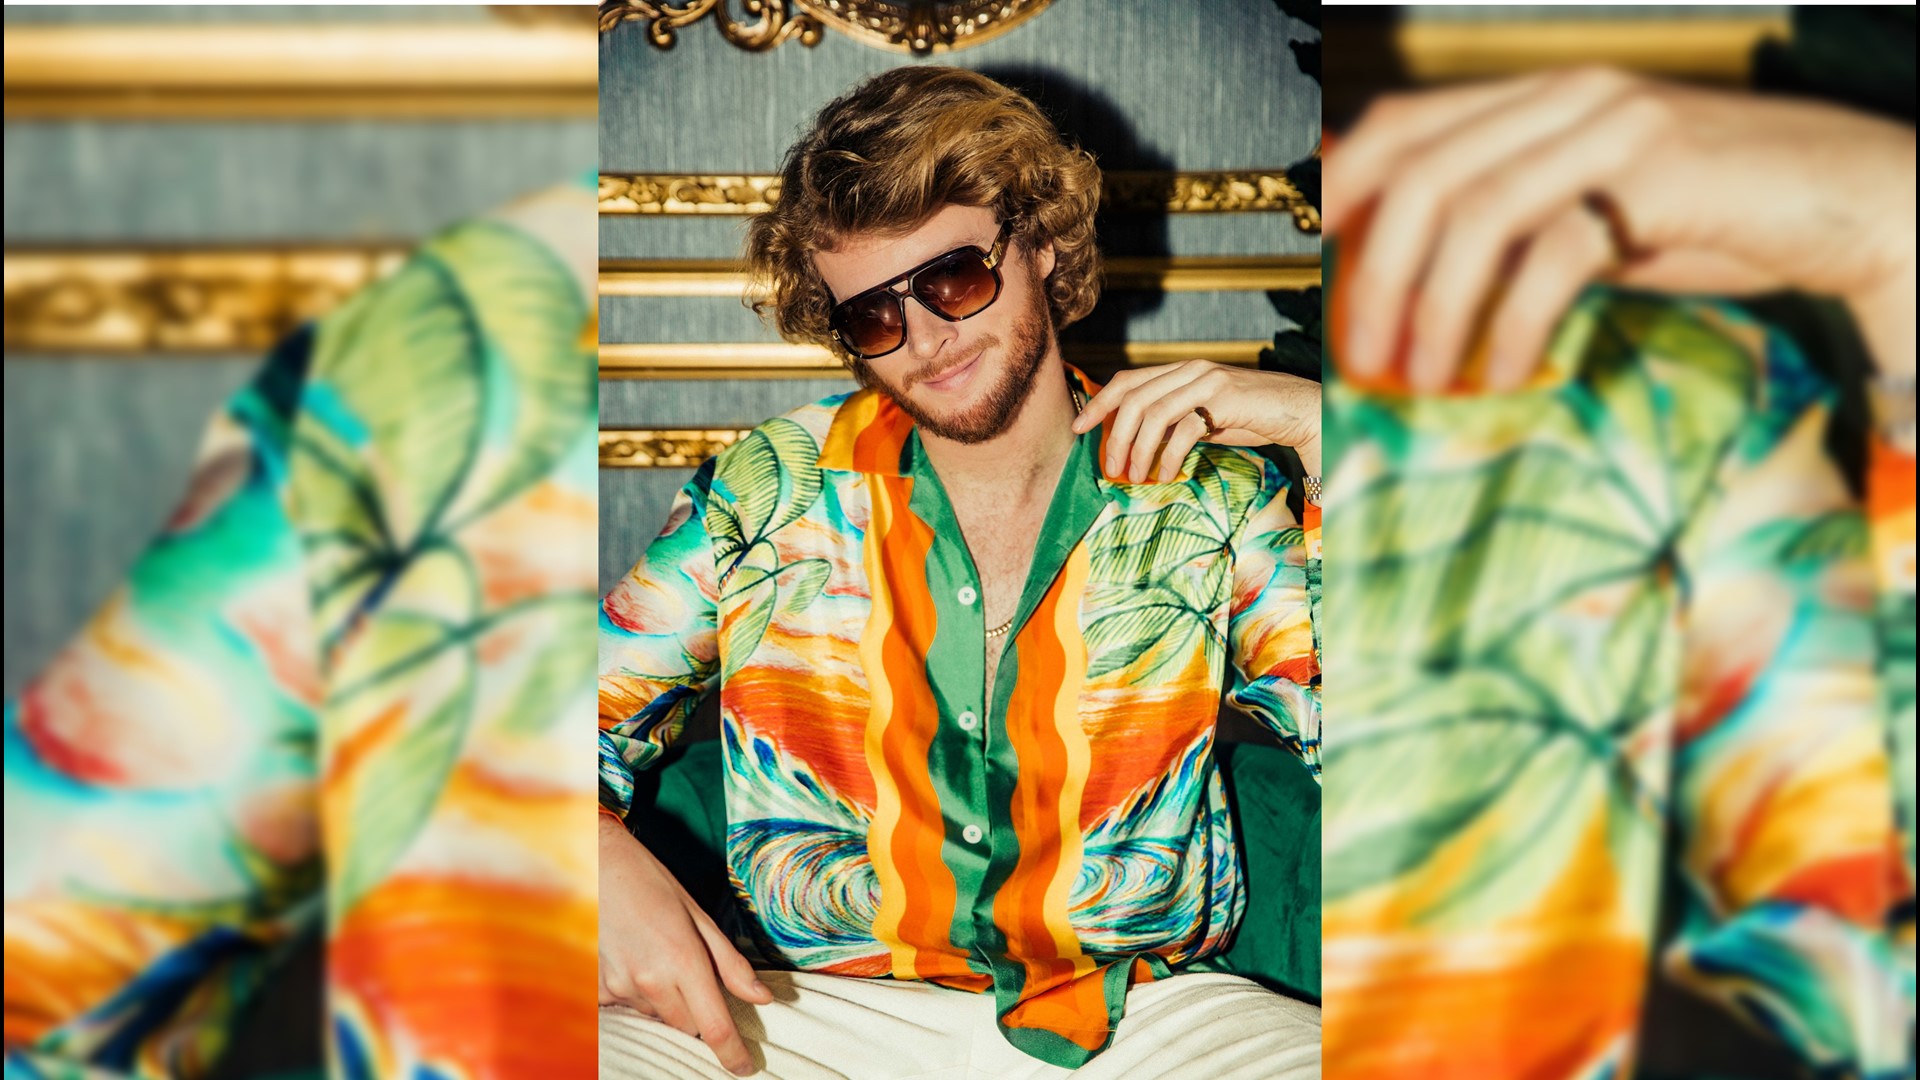 Before performing at the sold-out Grandstand, Yung Gravy spoke with KARE 11 about his homecoming, fair food faves and more.